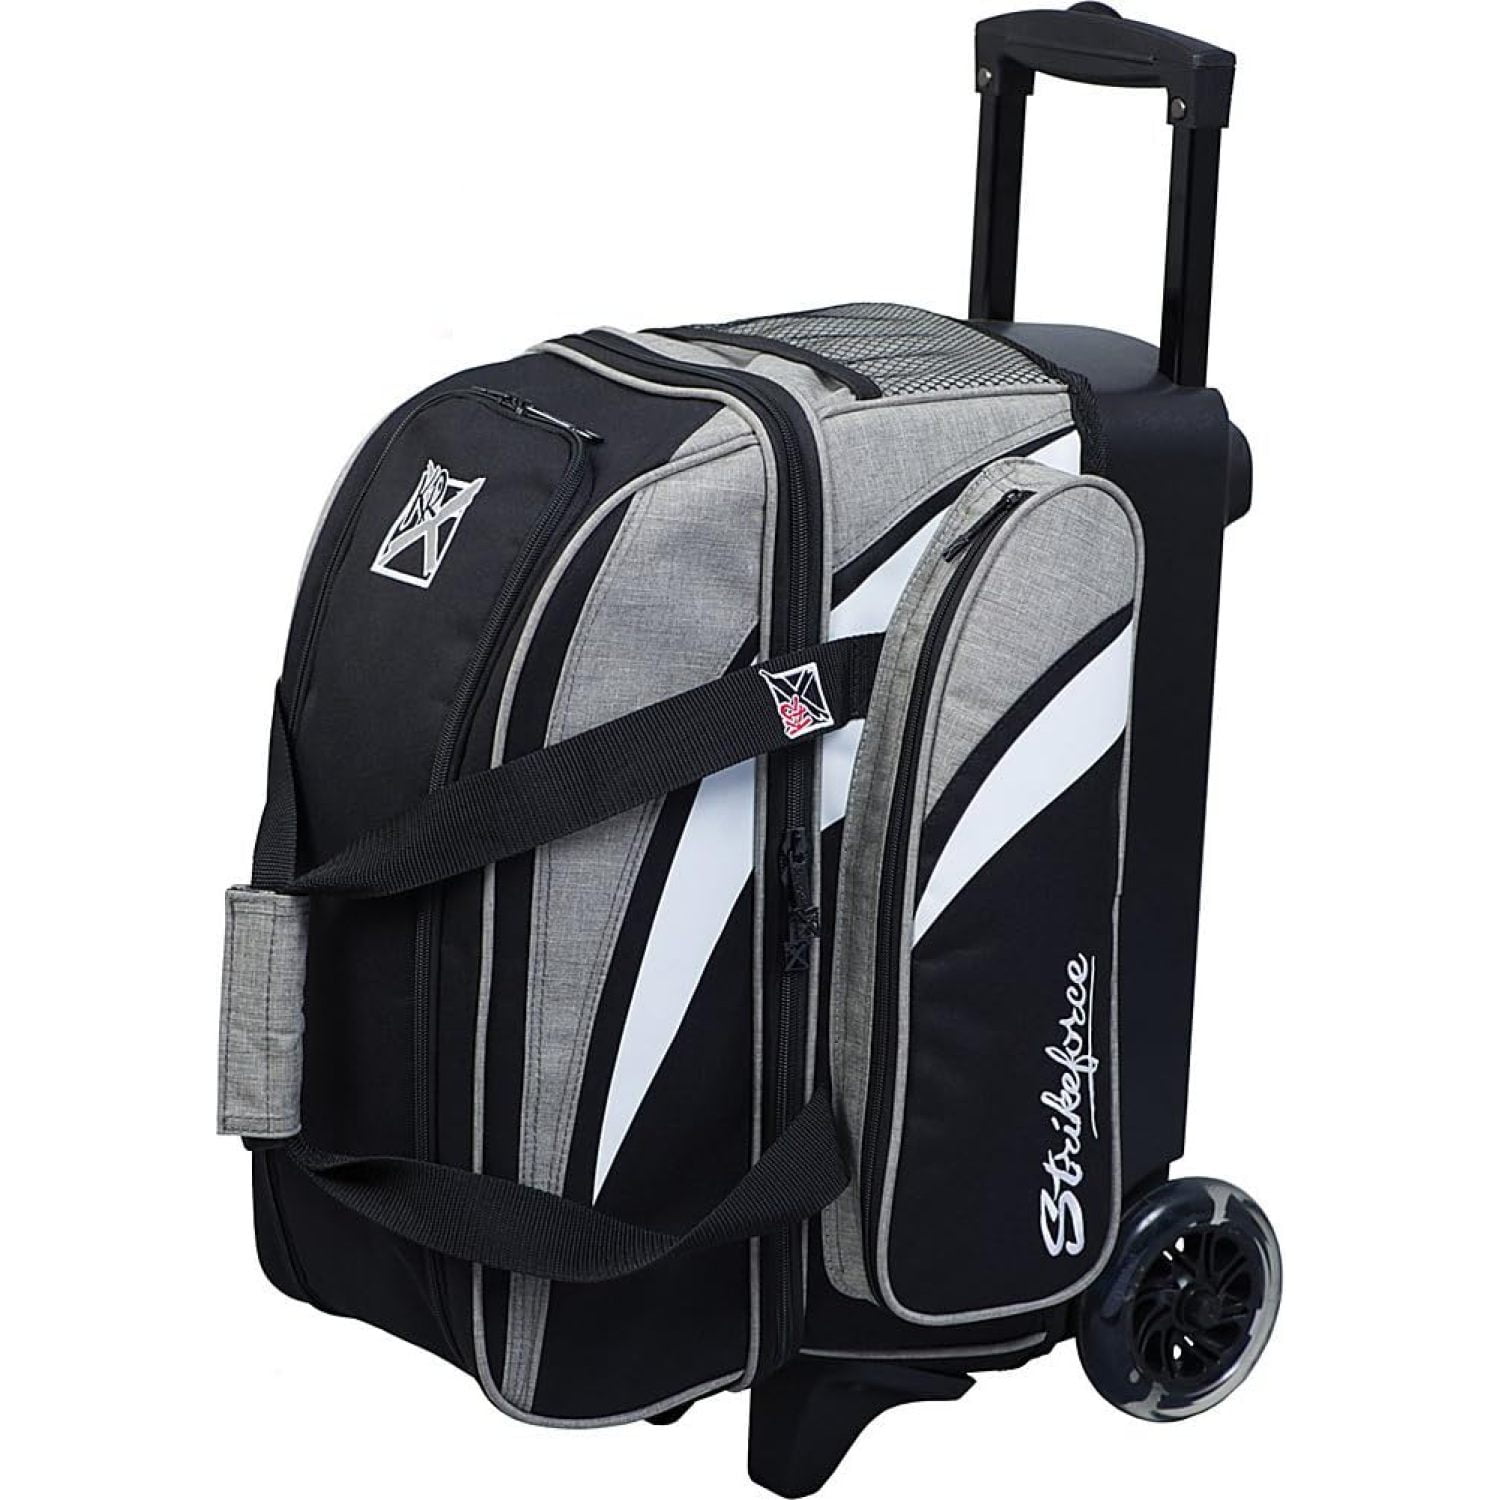 HetayC Cruiser Double Bowling Bag - With Deluxe 4.5